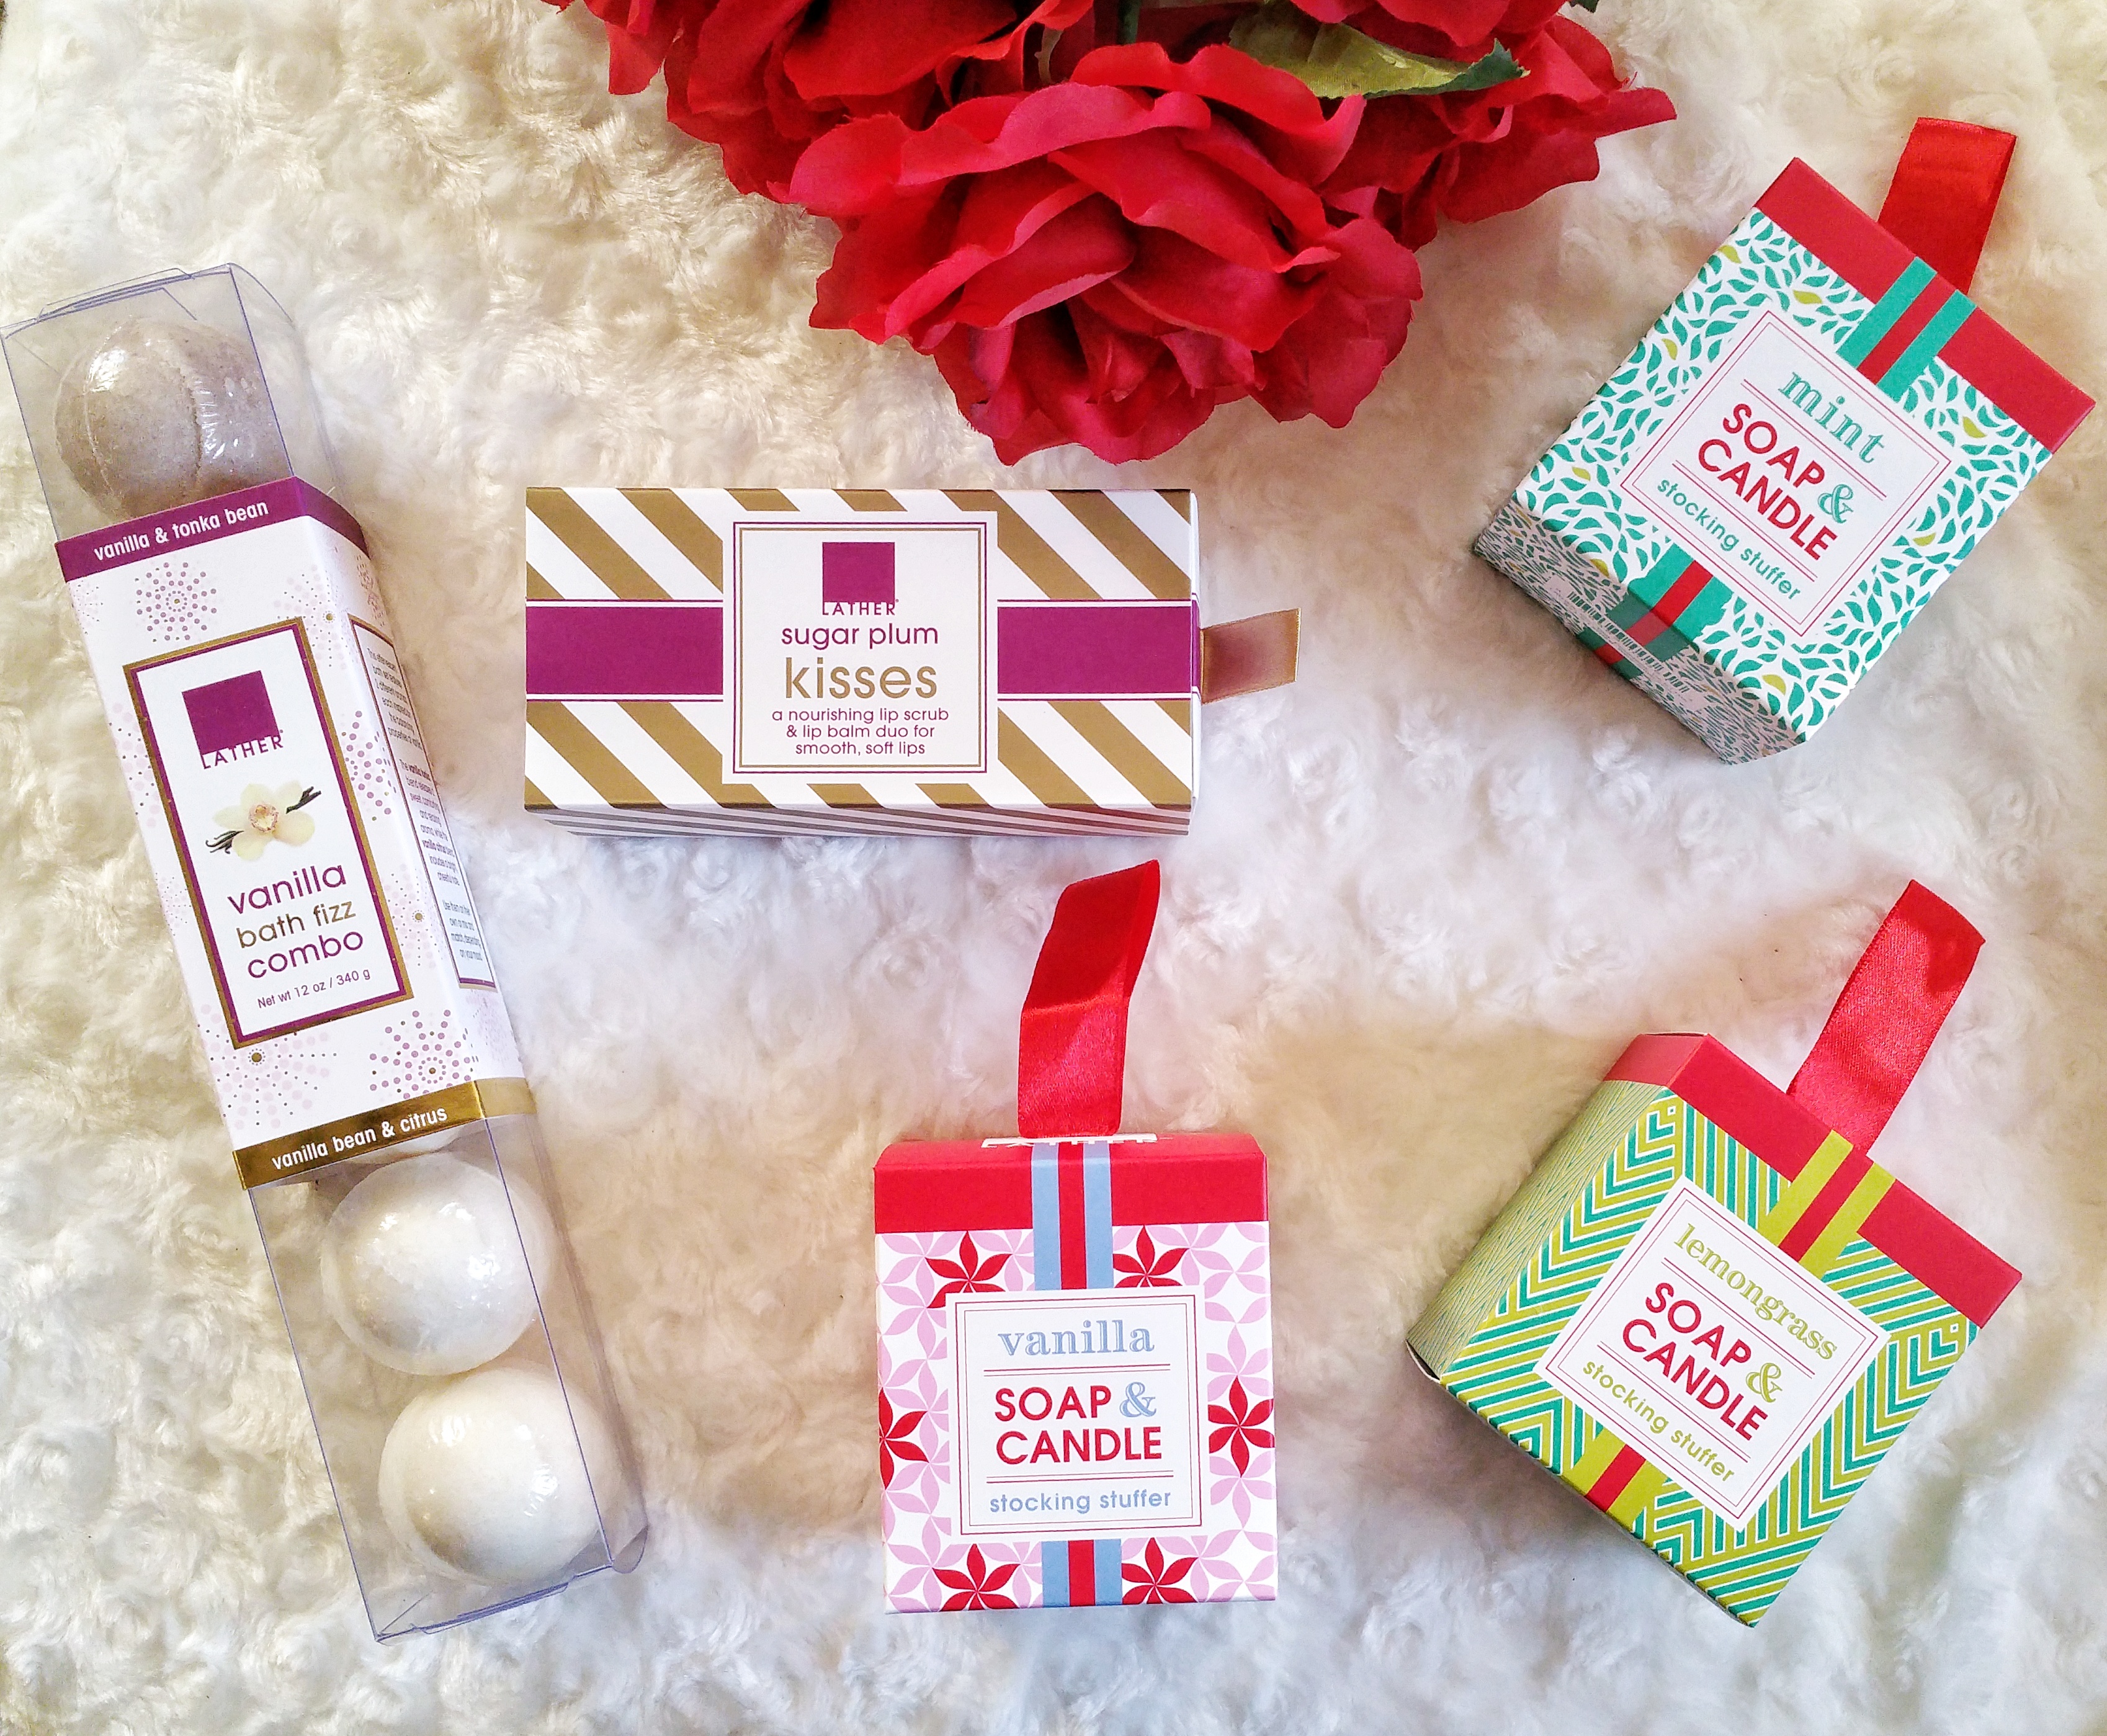 holiday gift guide, holiday gifts, skin care, body care, bath and body, holiday gifts for bath and body, soap, candle, lip balm, bath salts, bath care, 